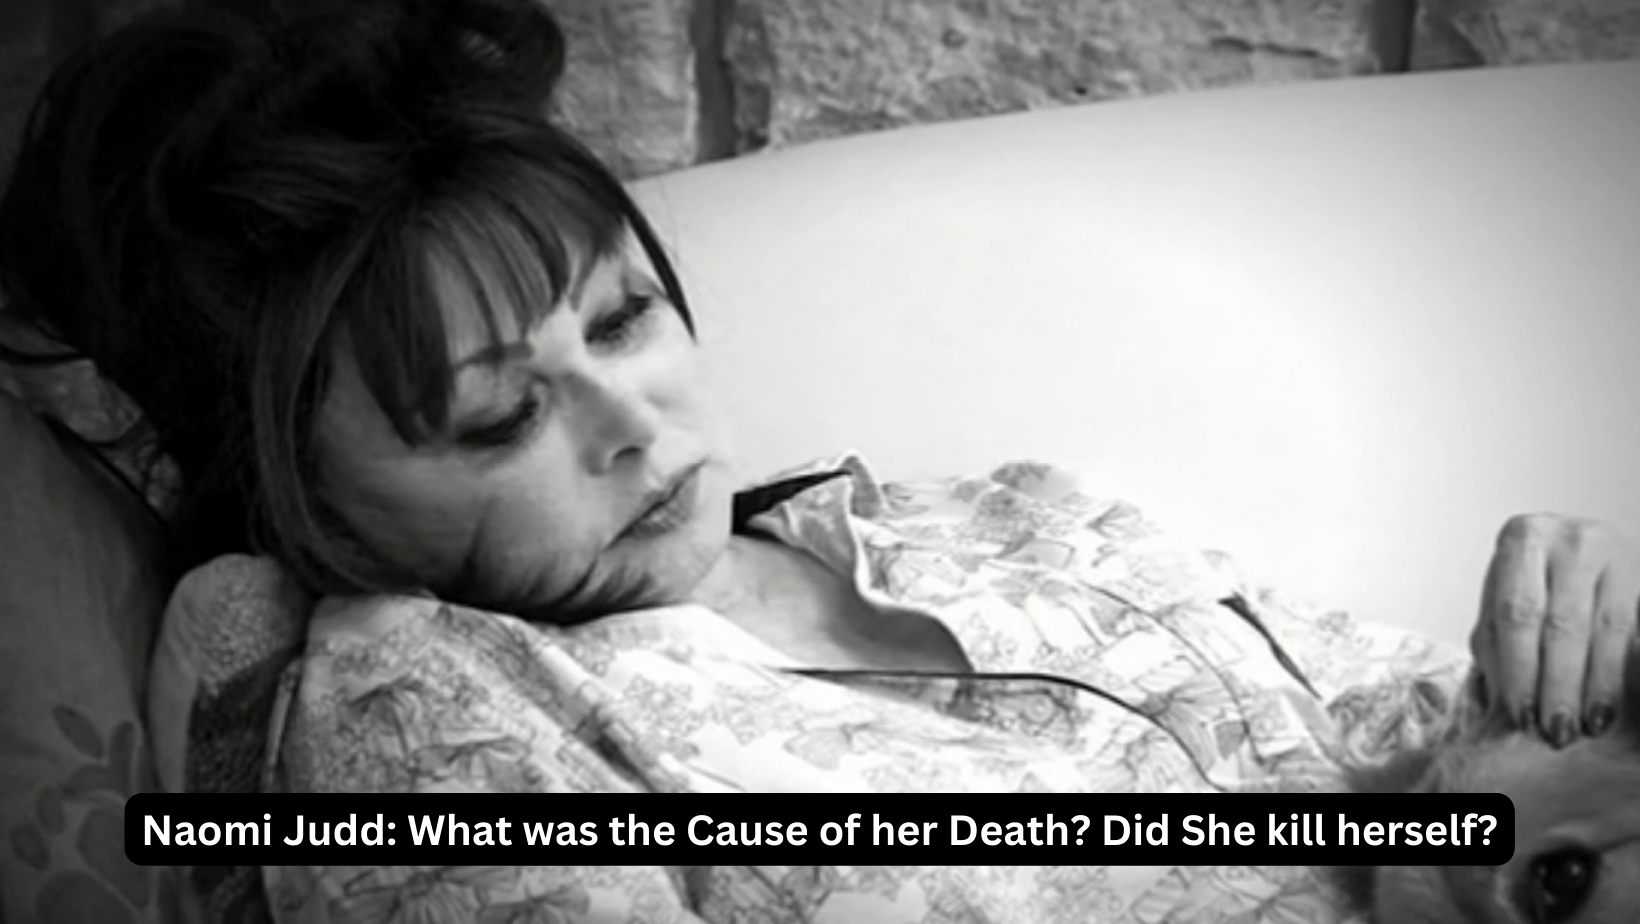 Naomi Judd: What was the Cause of her Death? Did She kill herself?